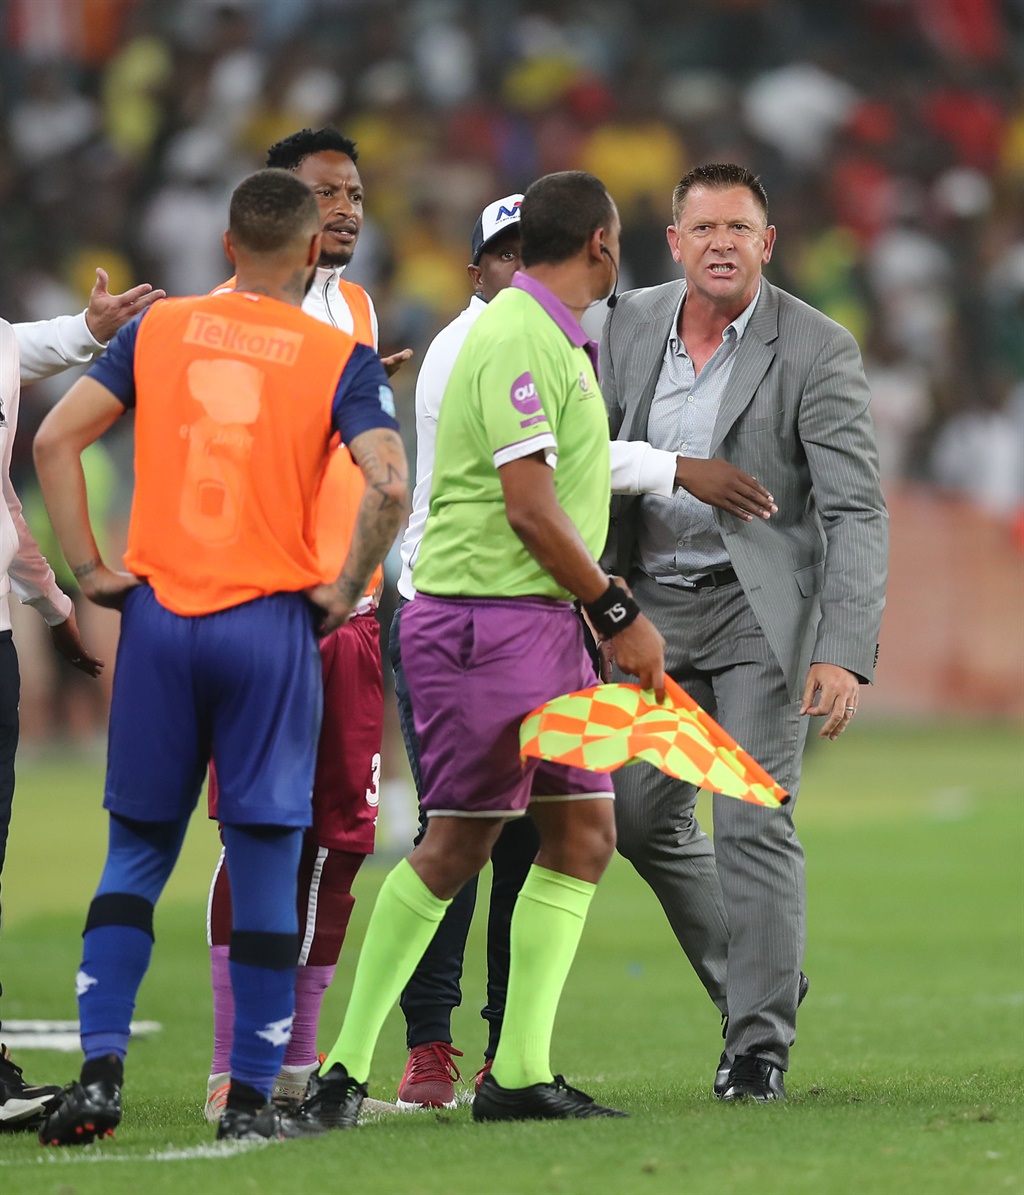 Eric Tinkler, coach of Maritzburg United agues with the assistant referee during the 2019 Telkom Knockout final match between Maritzburg United and Mamelodi Sundowns at Moses Mabhida Stadium Durban, on 14 December 2019